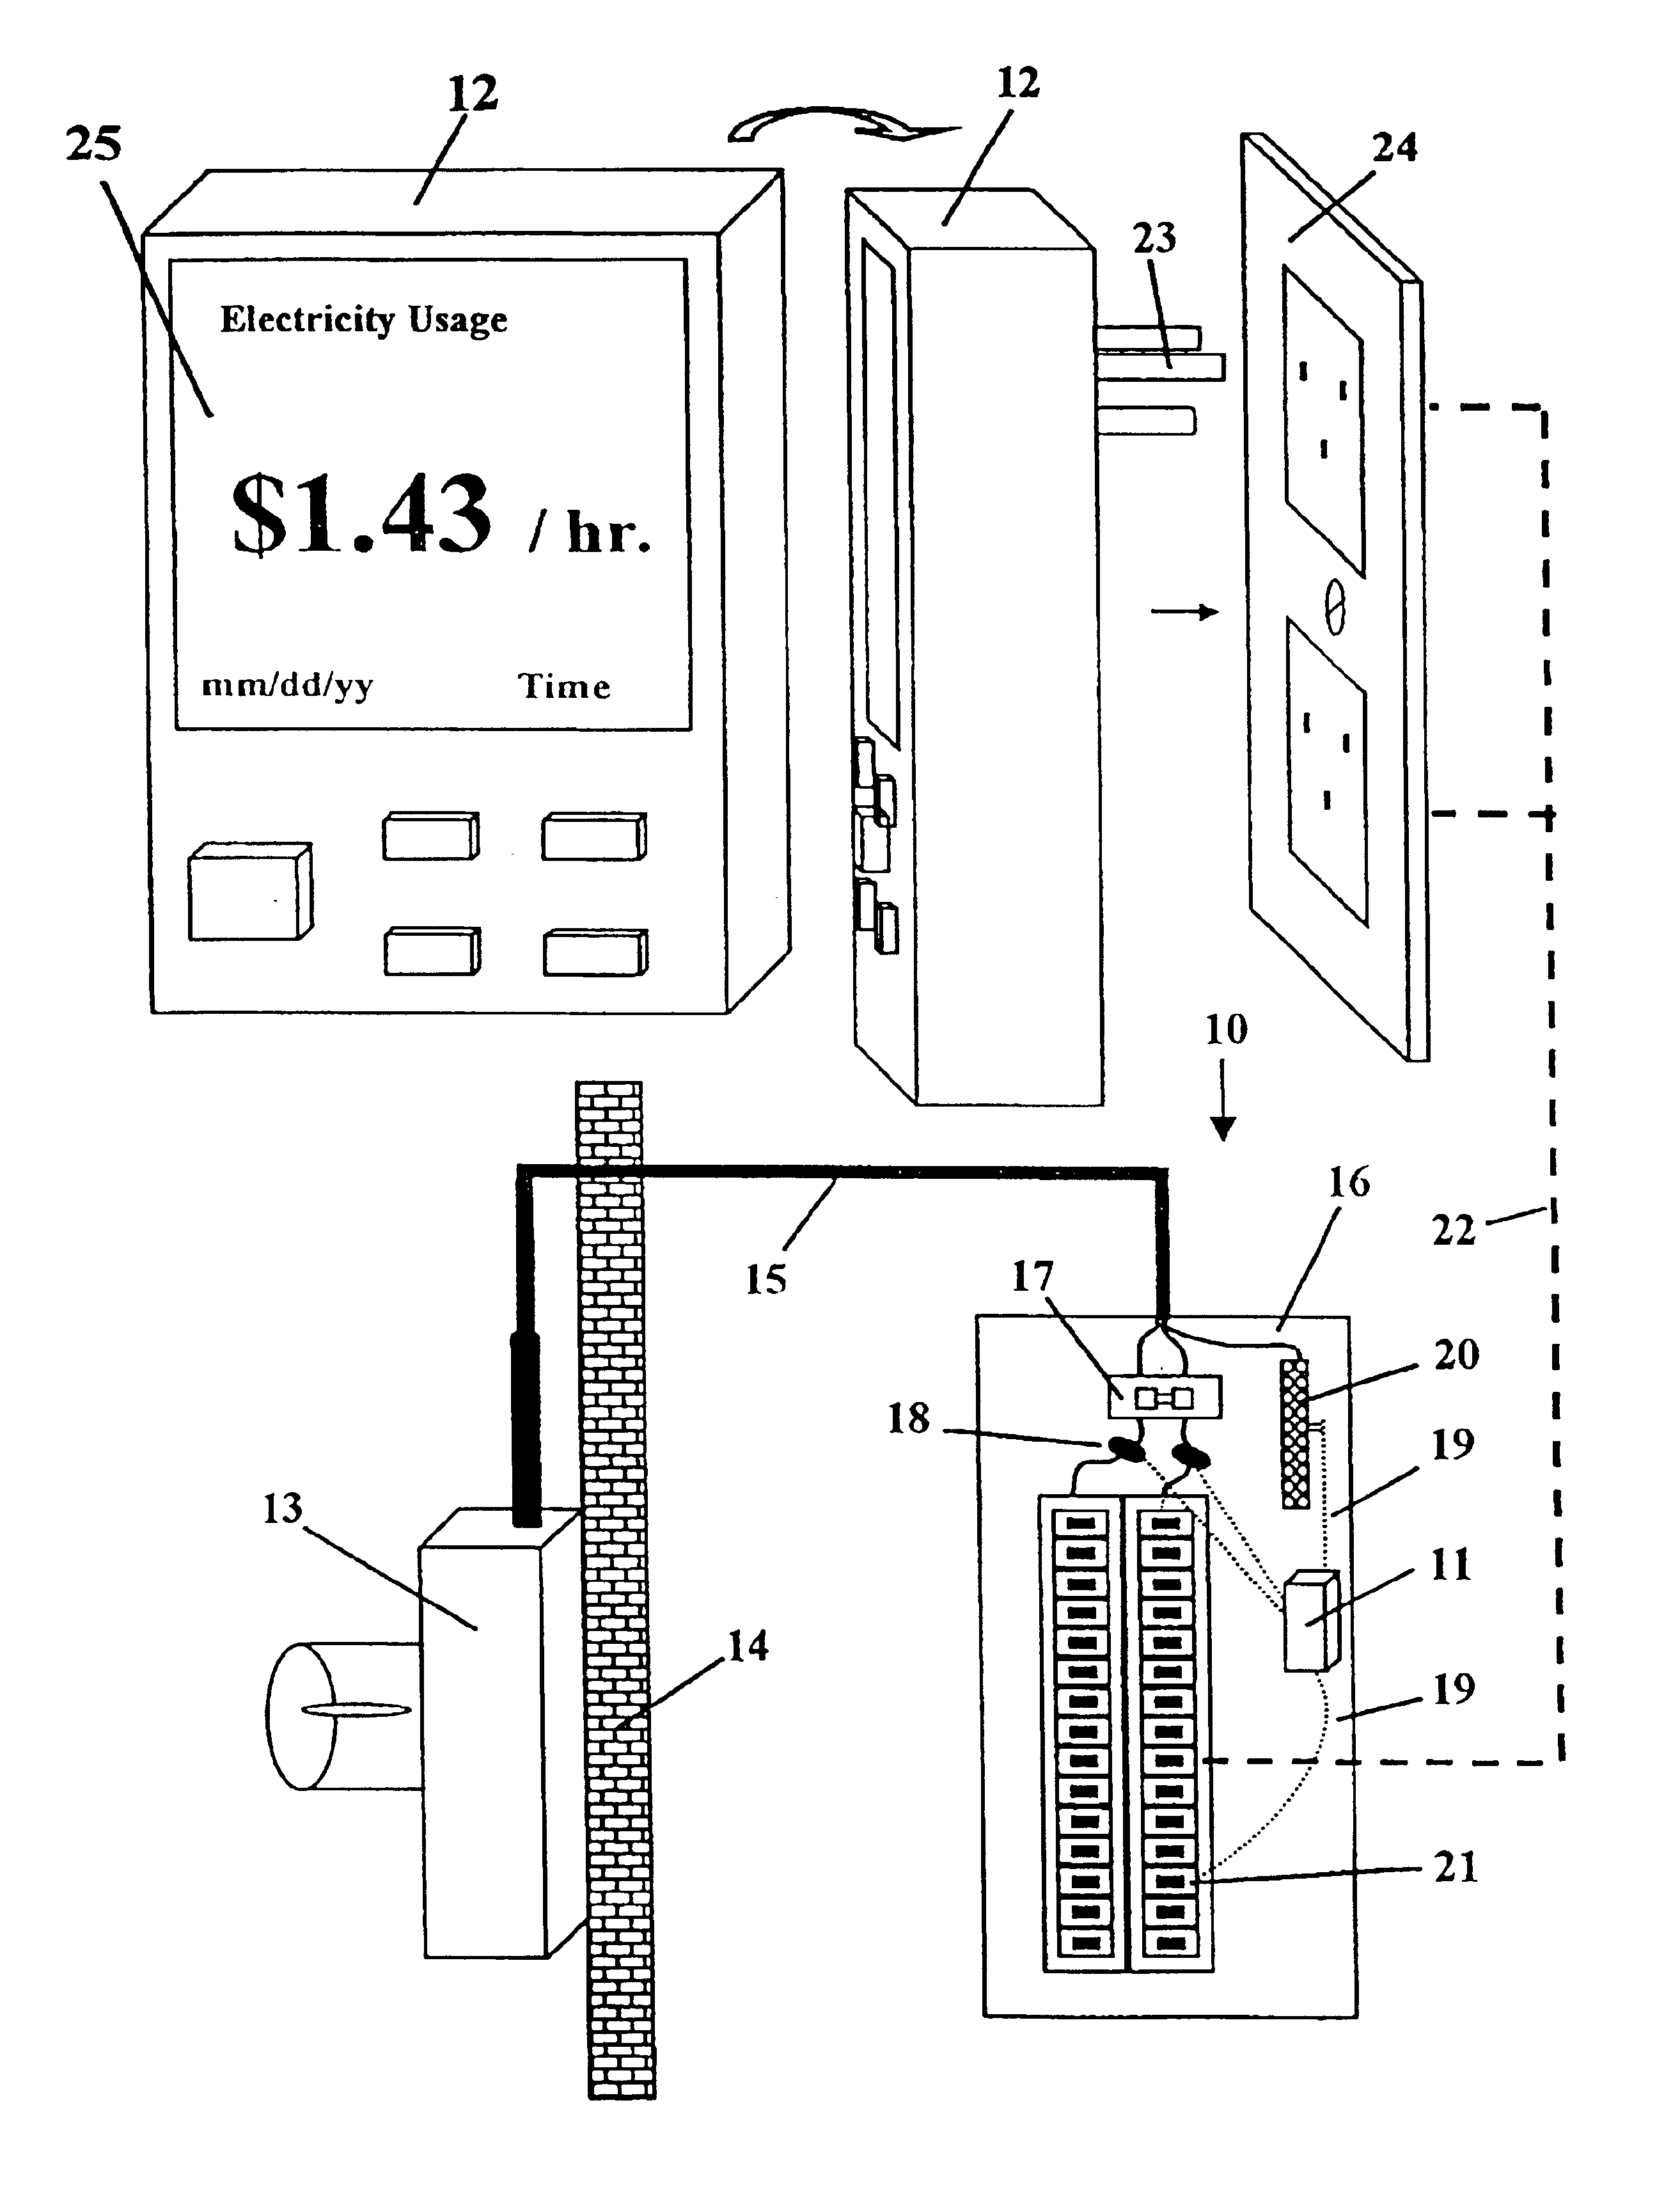 Programmable electricity consumption monitoring system and method